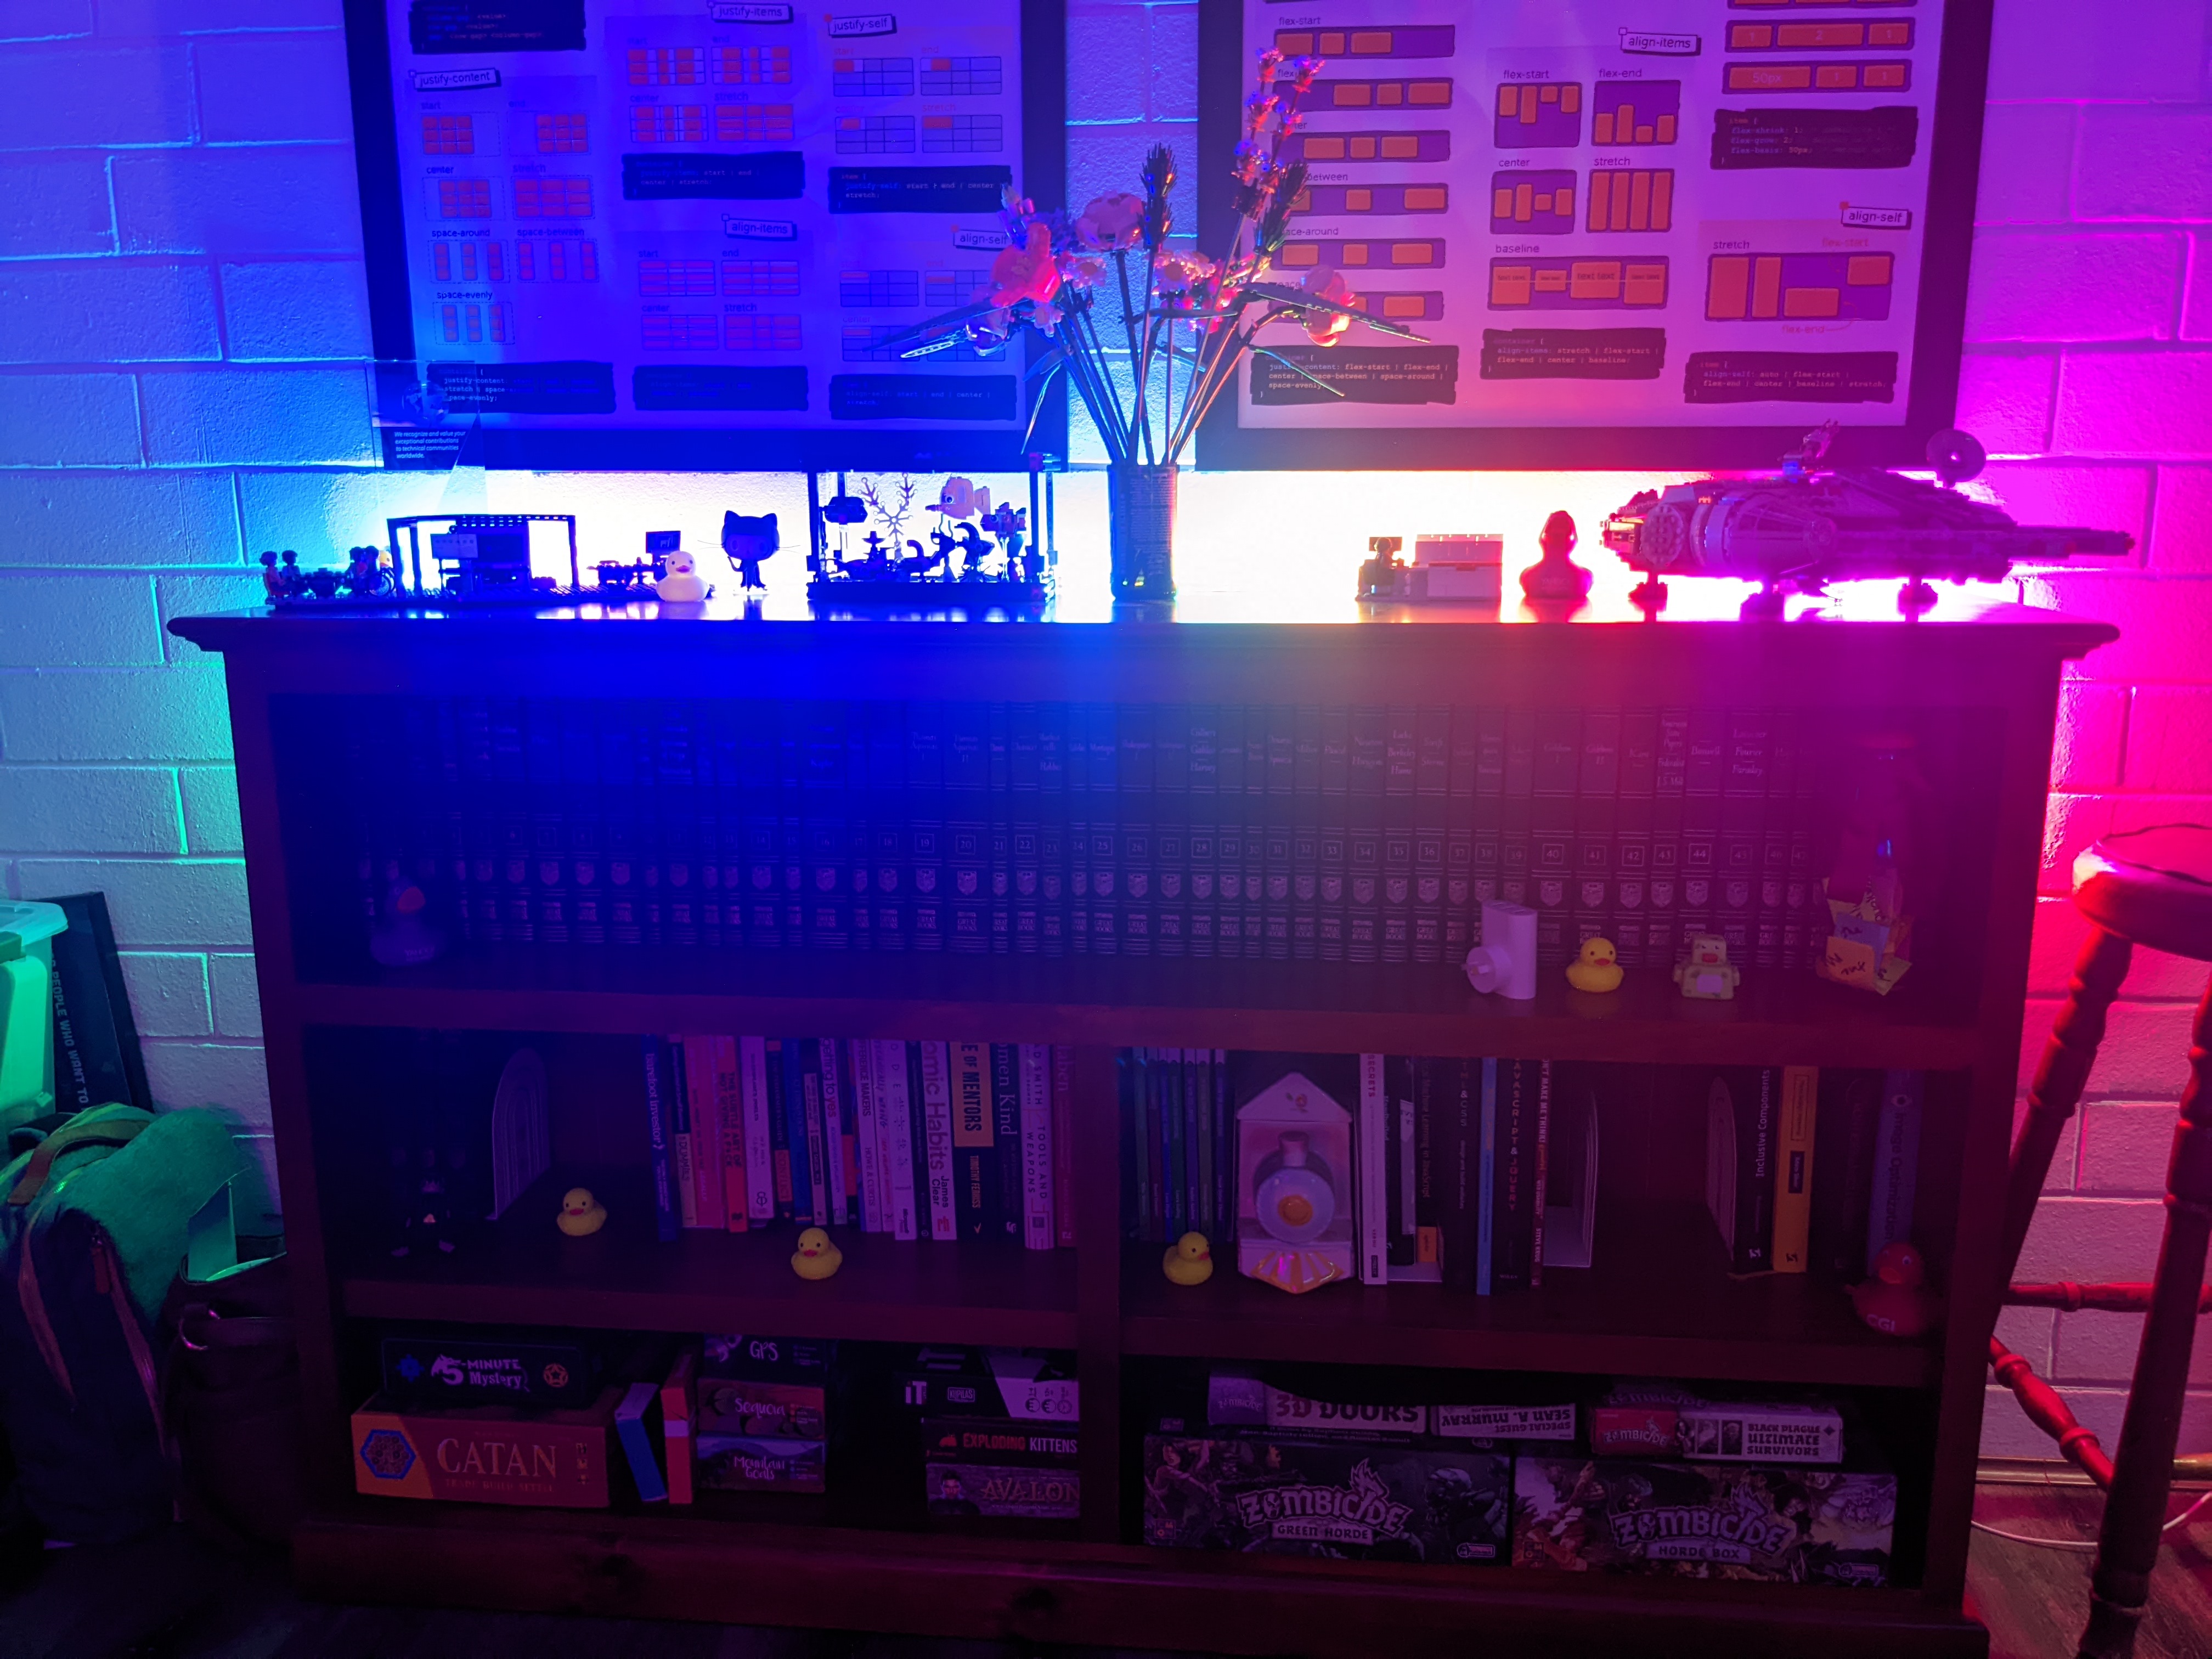 A similar photo of the bookshelf, this time dimly list to show the LED lights mounted on the back of the shelf